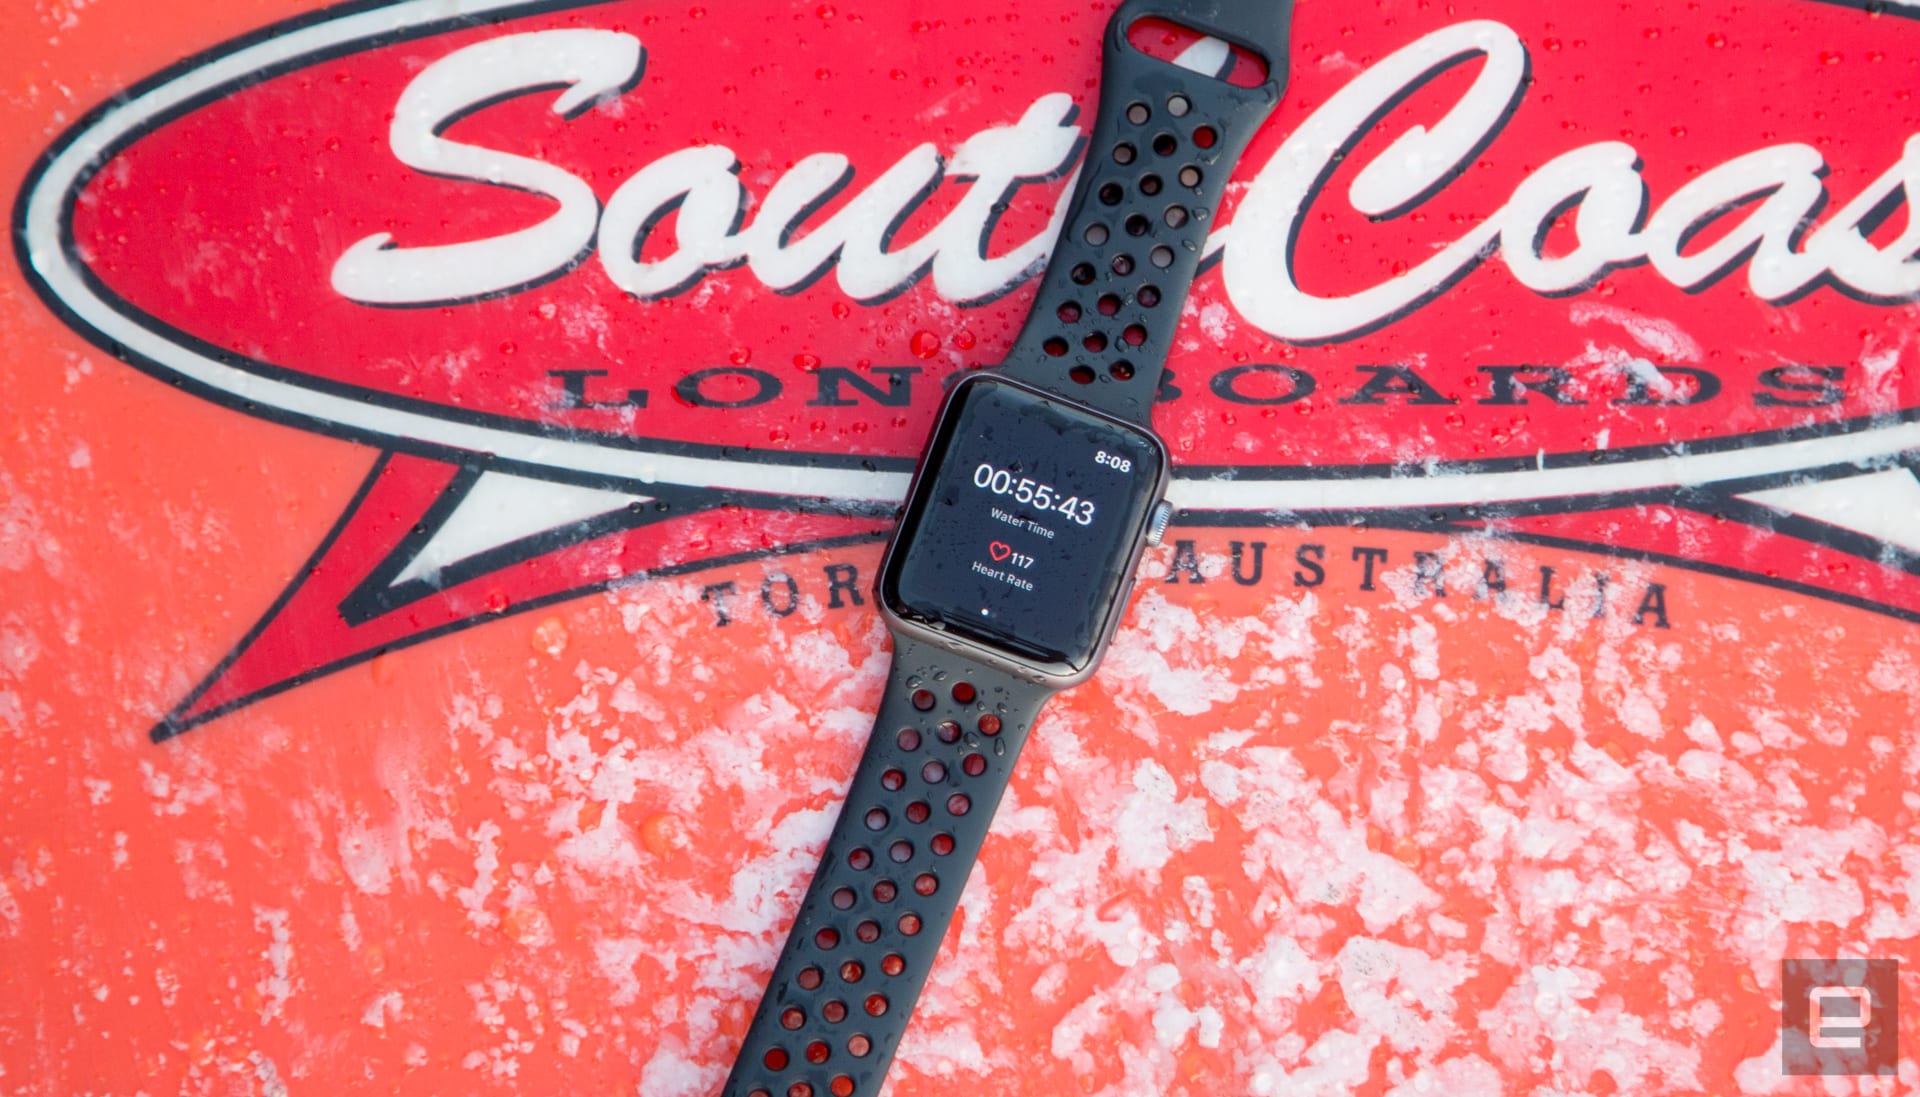 Surfline Sessions for Apple Watch